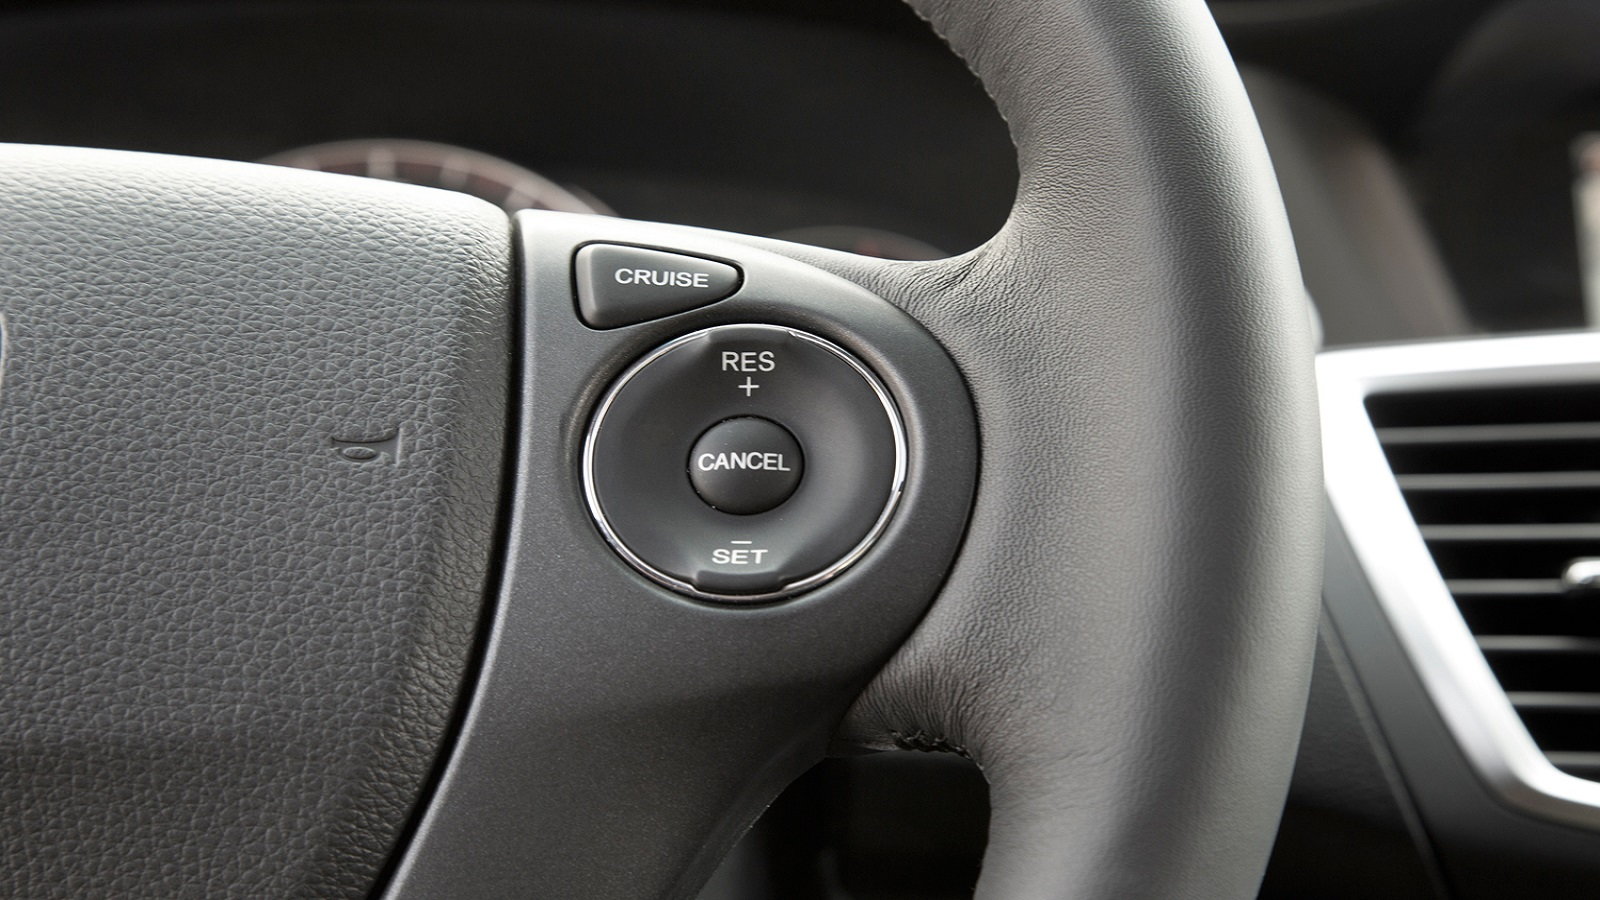 Honda Civic: Why is My Cruise Control Not Working? | Honda-tech 2001 Honda Crv Cruise Control Not Working